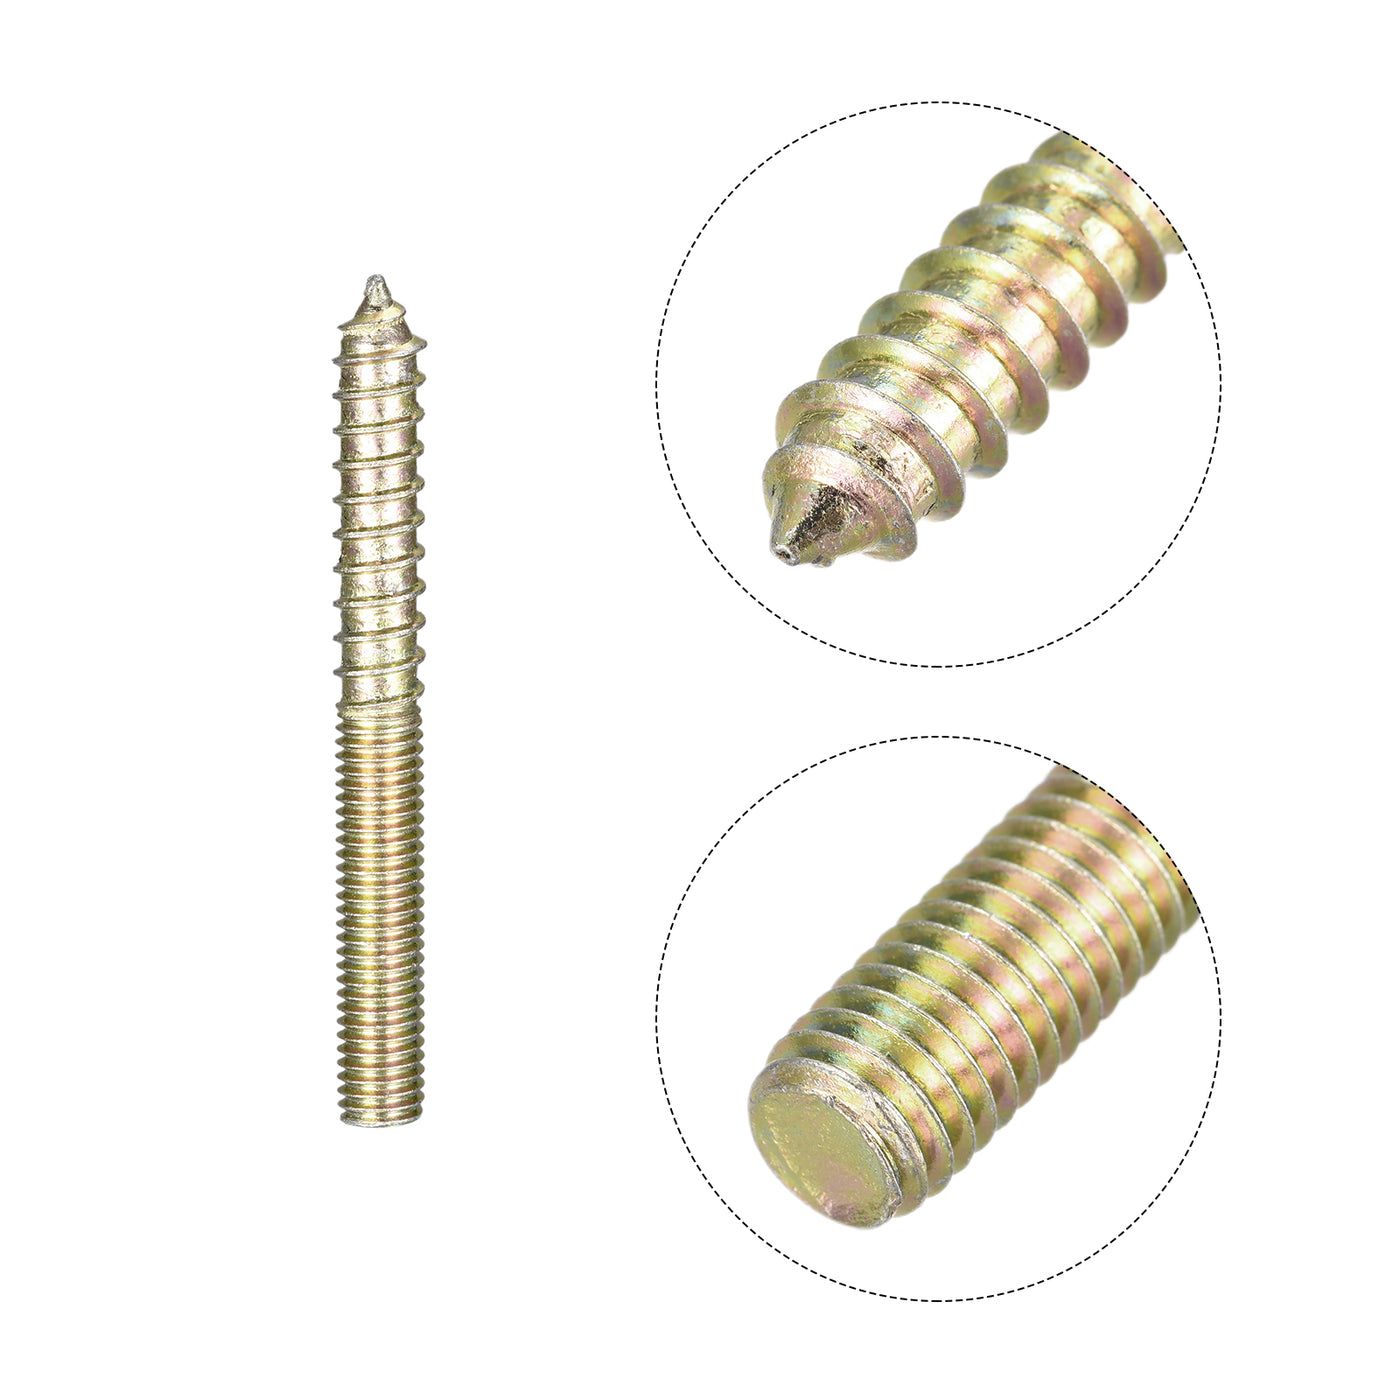 Uxcell Uxcell M8x80mm Hanger Bolts, 8pcs Double Ended Thread Dowel Screws for Wood Furniture